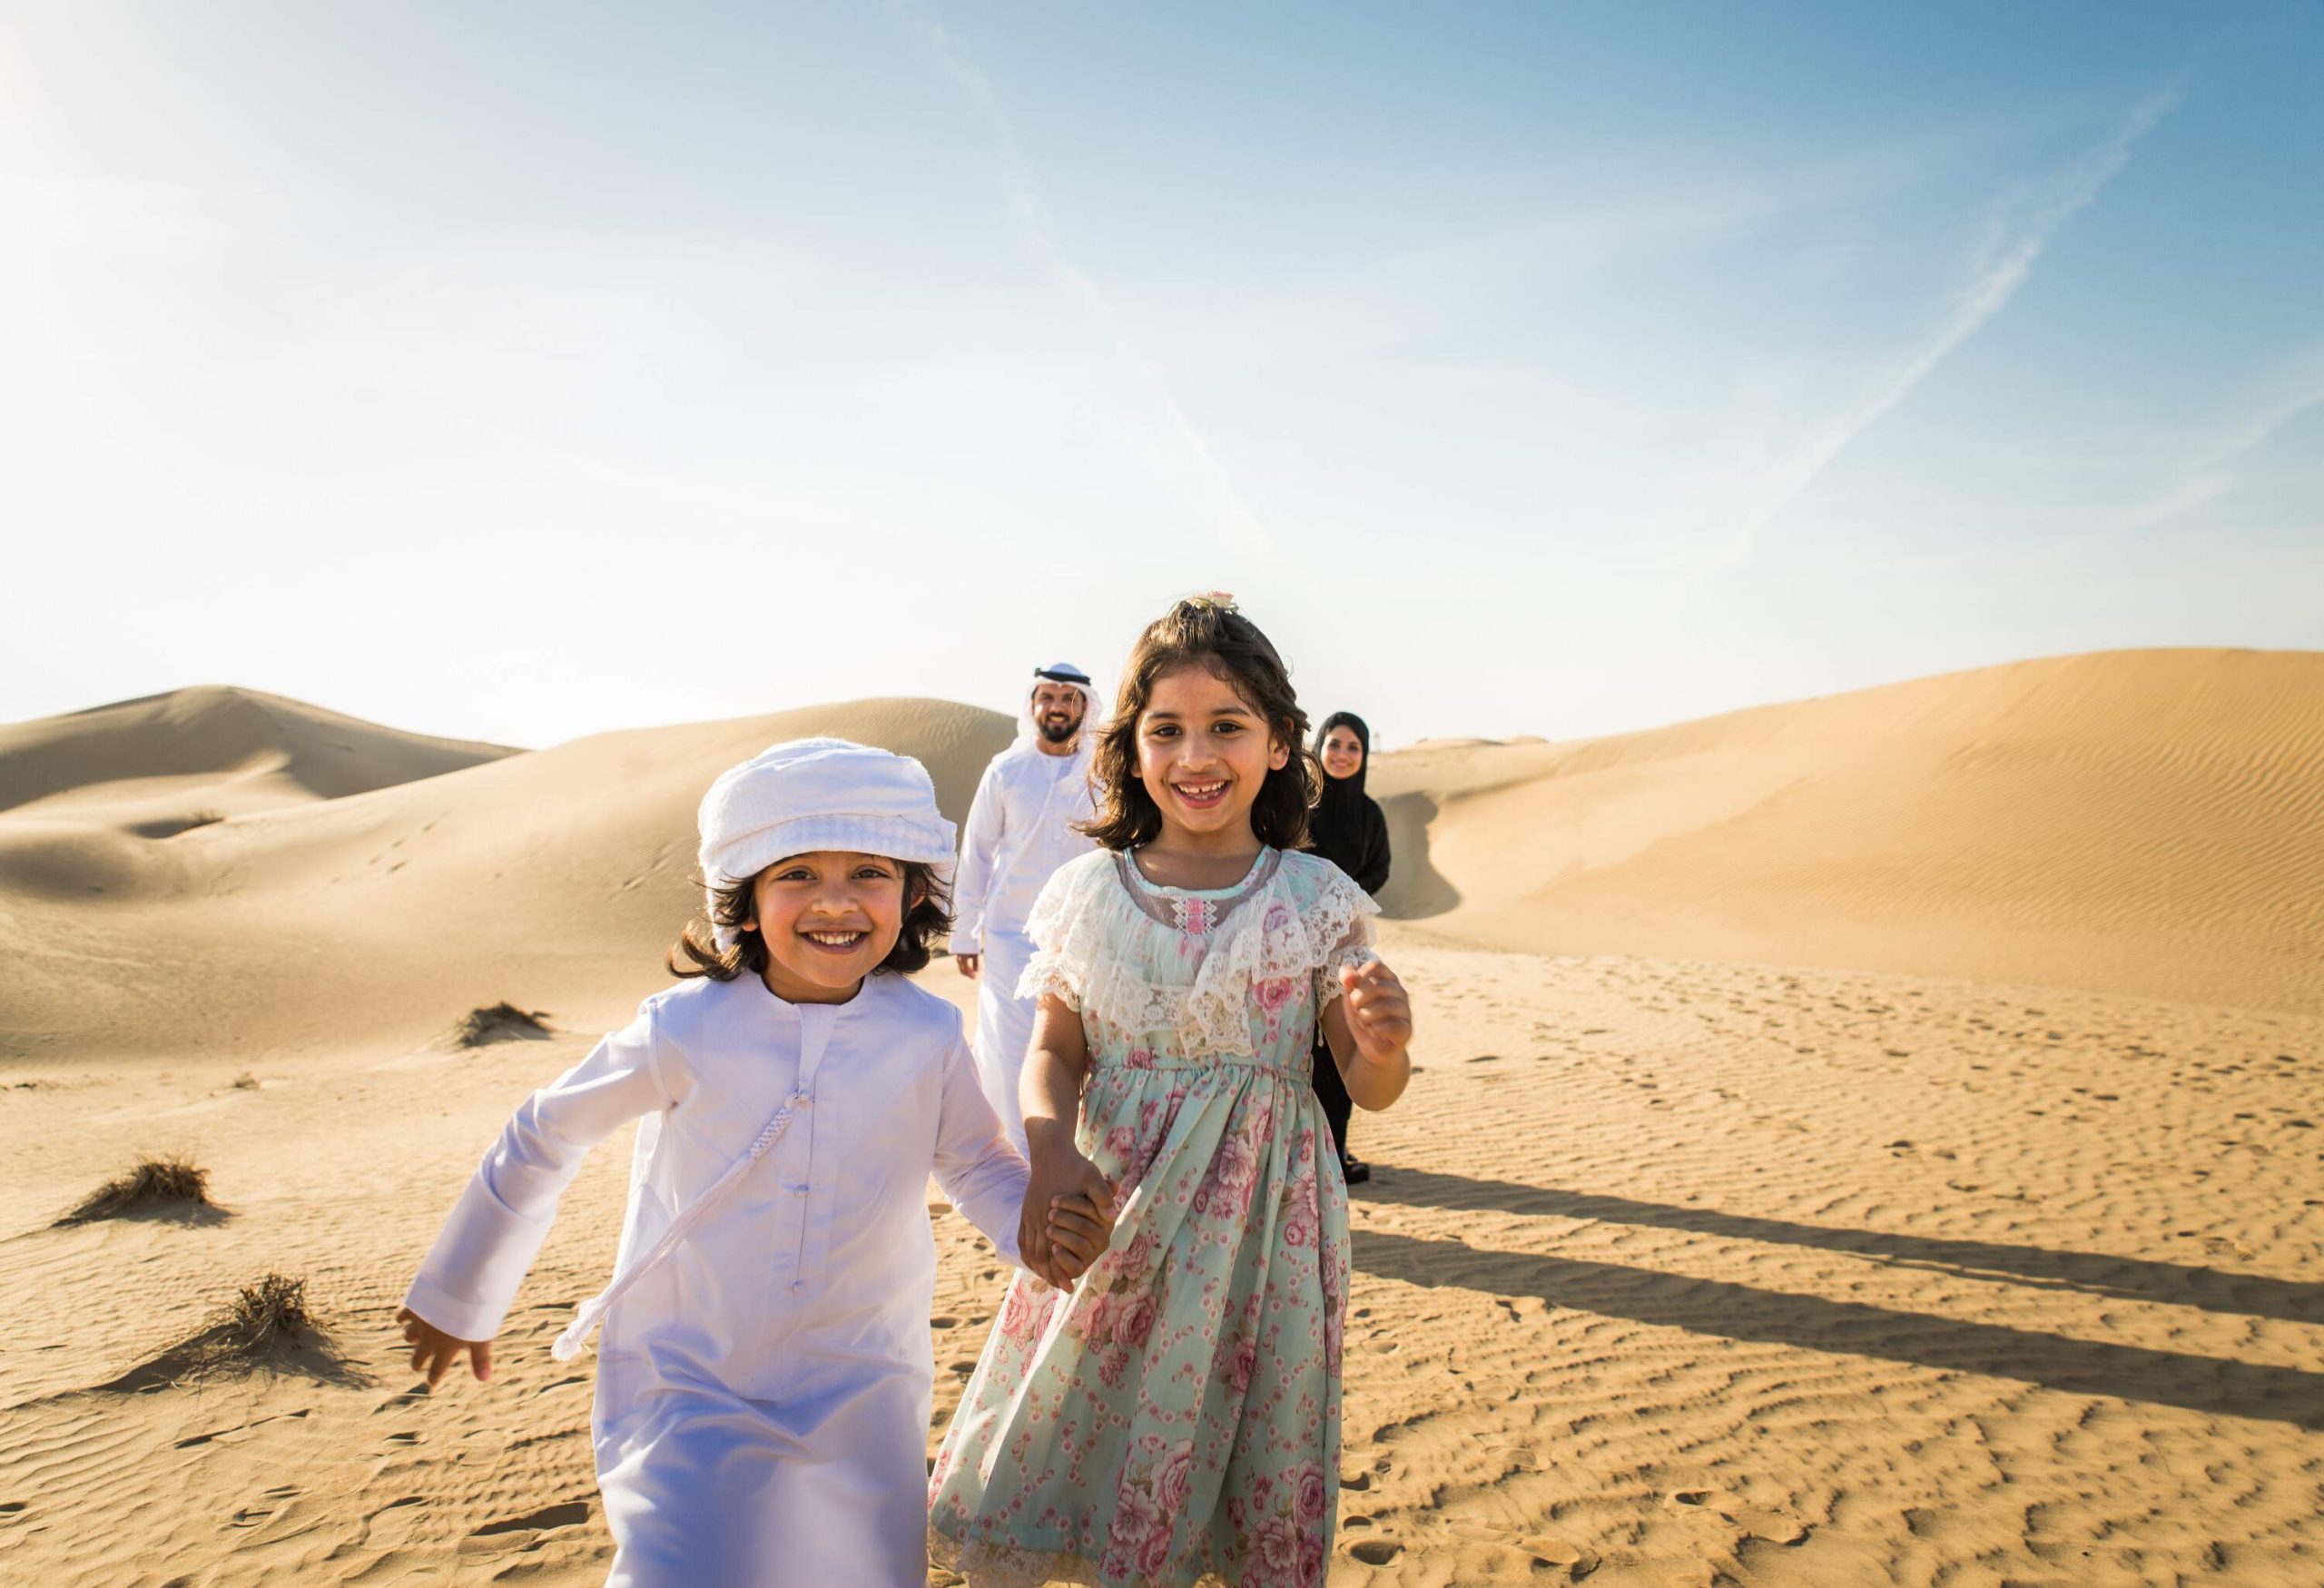 Arab family of four in the desert, the mother, father and son are dressed in traditional Muslim clothes and the daughter is wearing a colourful dress.